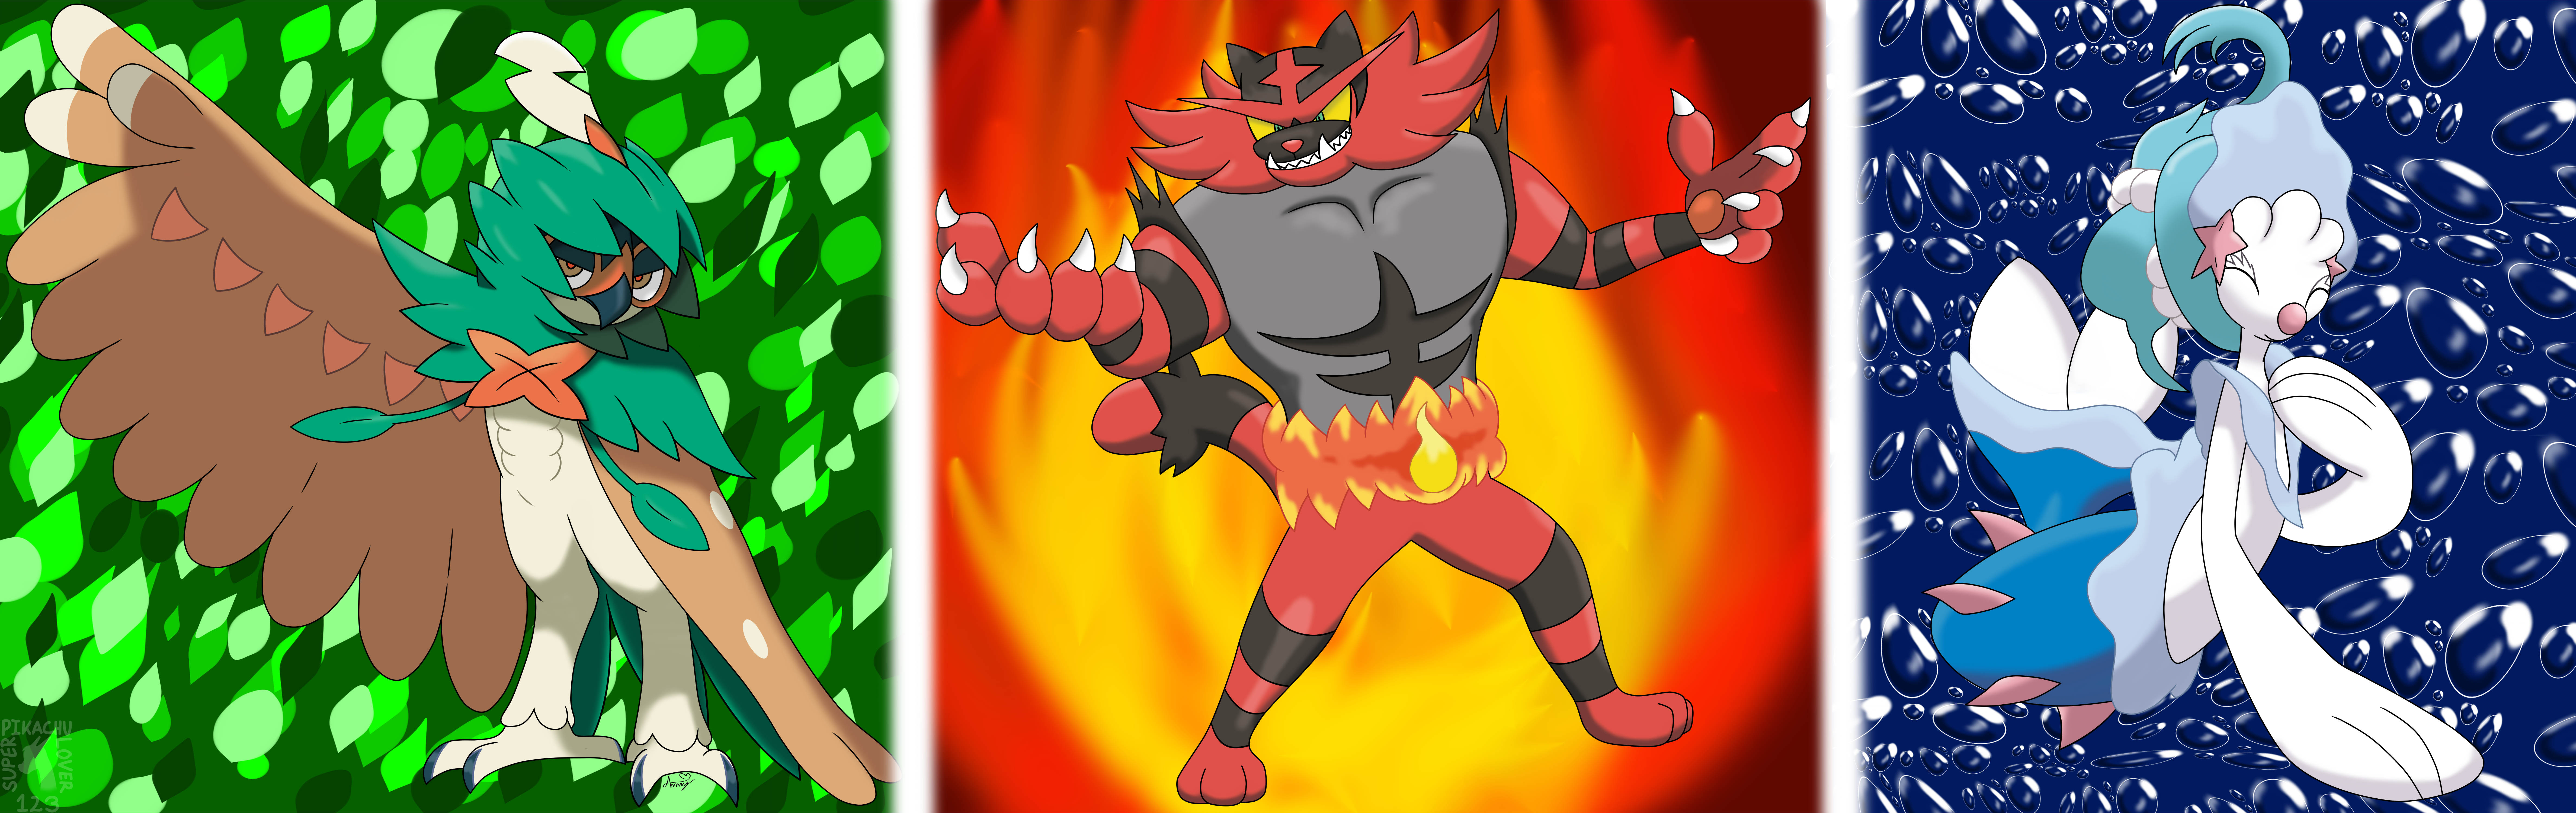 Pokemon X and Y starters evolutions by RZGmon200 on DeviantArt